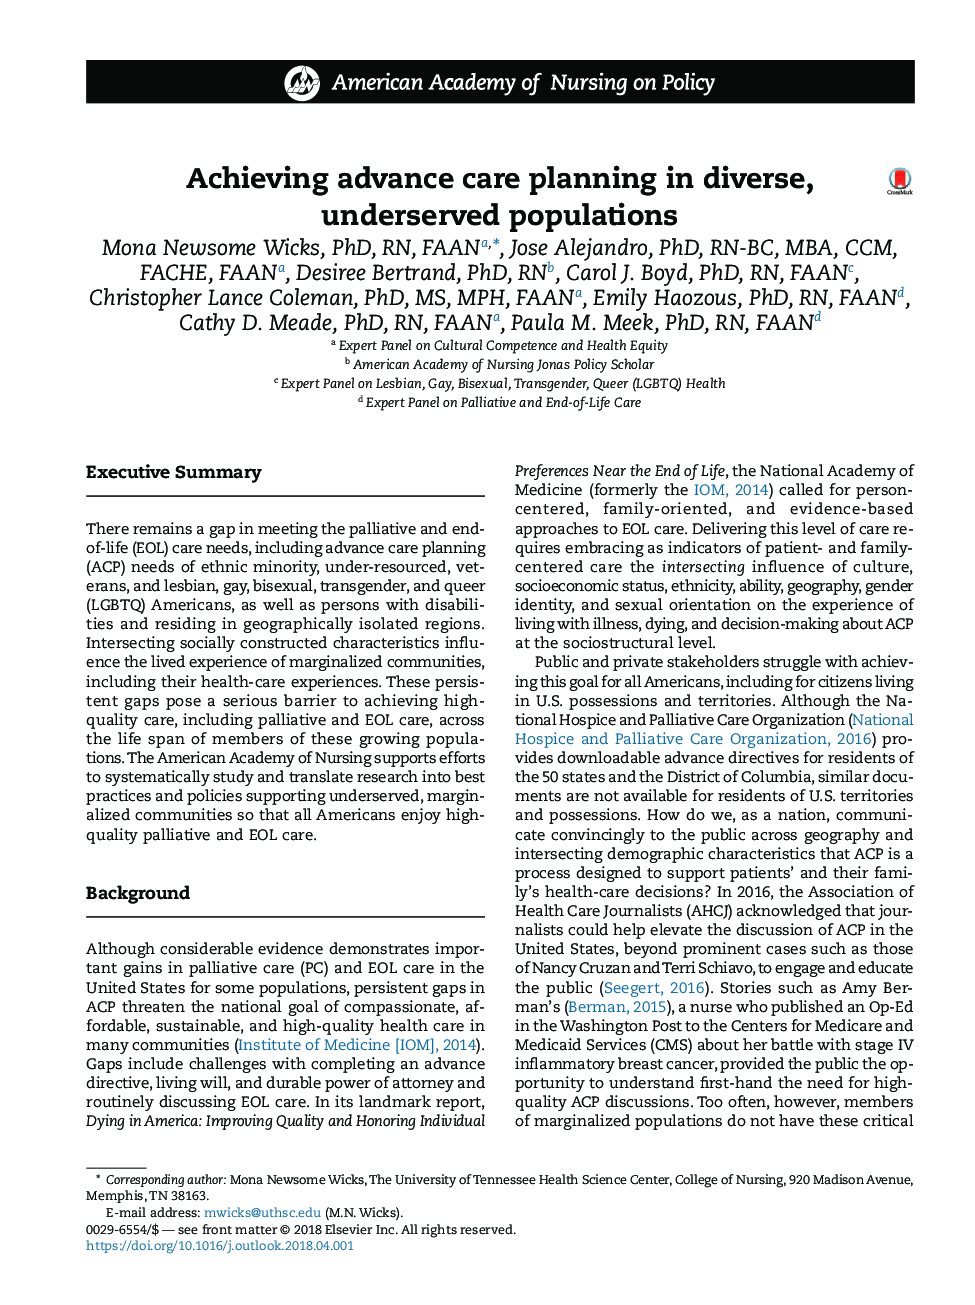 Achieving advance care planning in diverse, underserved populations